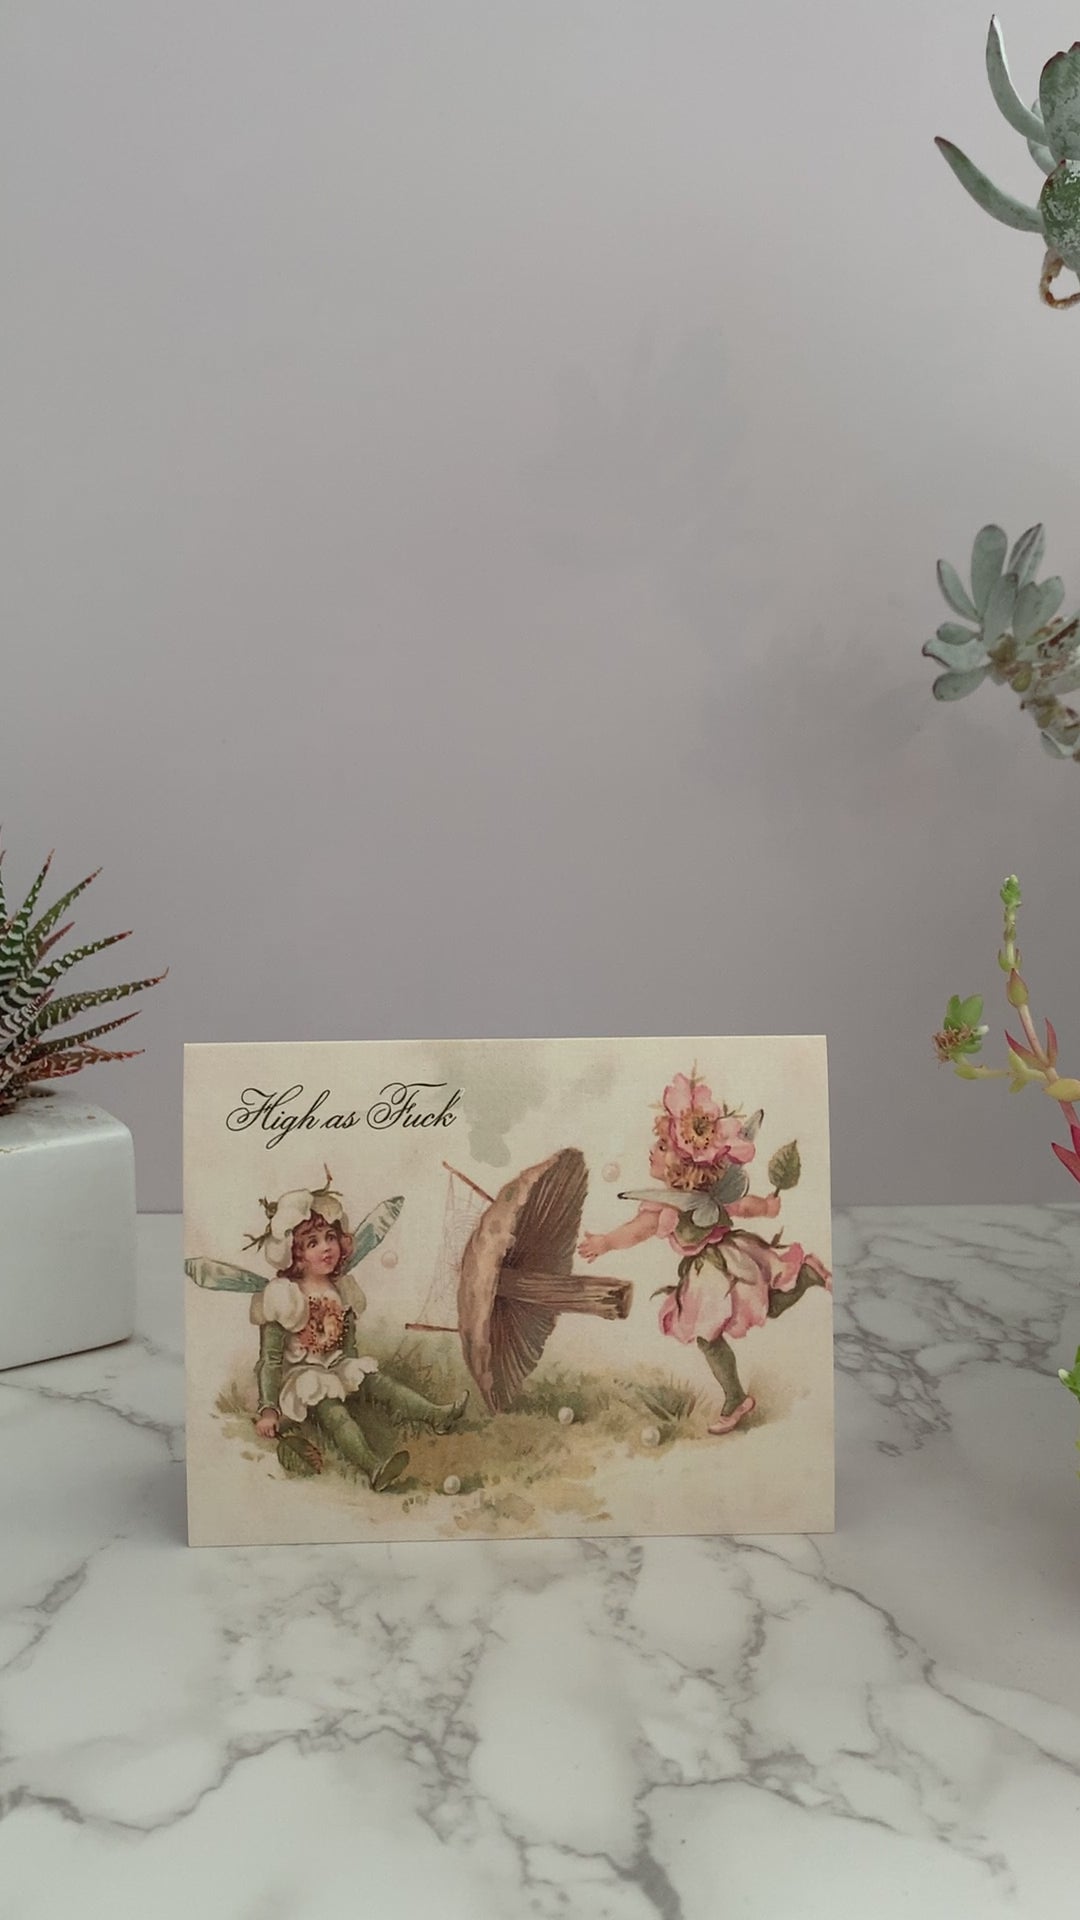 All purpose greeting card featuring a vintage image of two fairies playing badminton, with a mushroom holding the net. One fairy is prancing hitting a ball, while the other fairy is sitting on the ground with a dizzy stare. The greeting reads, "High as Fuck." Vintage pastel colors of pink, green, and cream. Blank inside.  